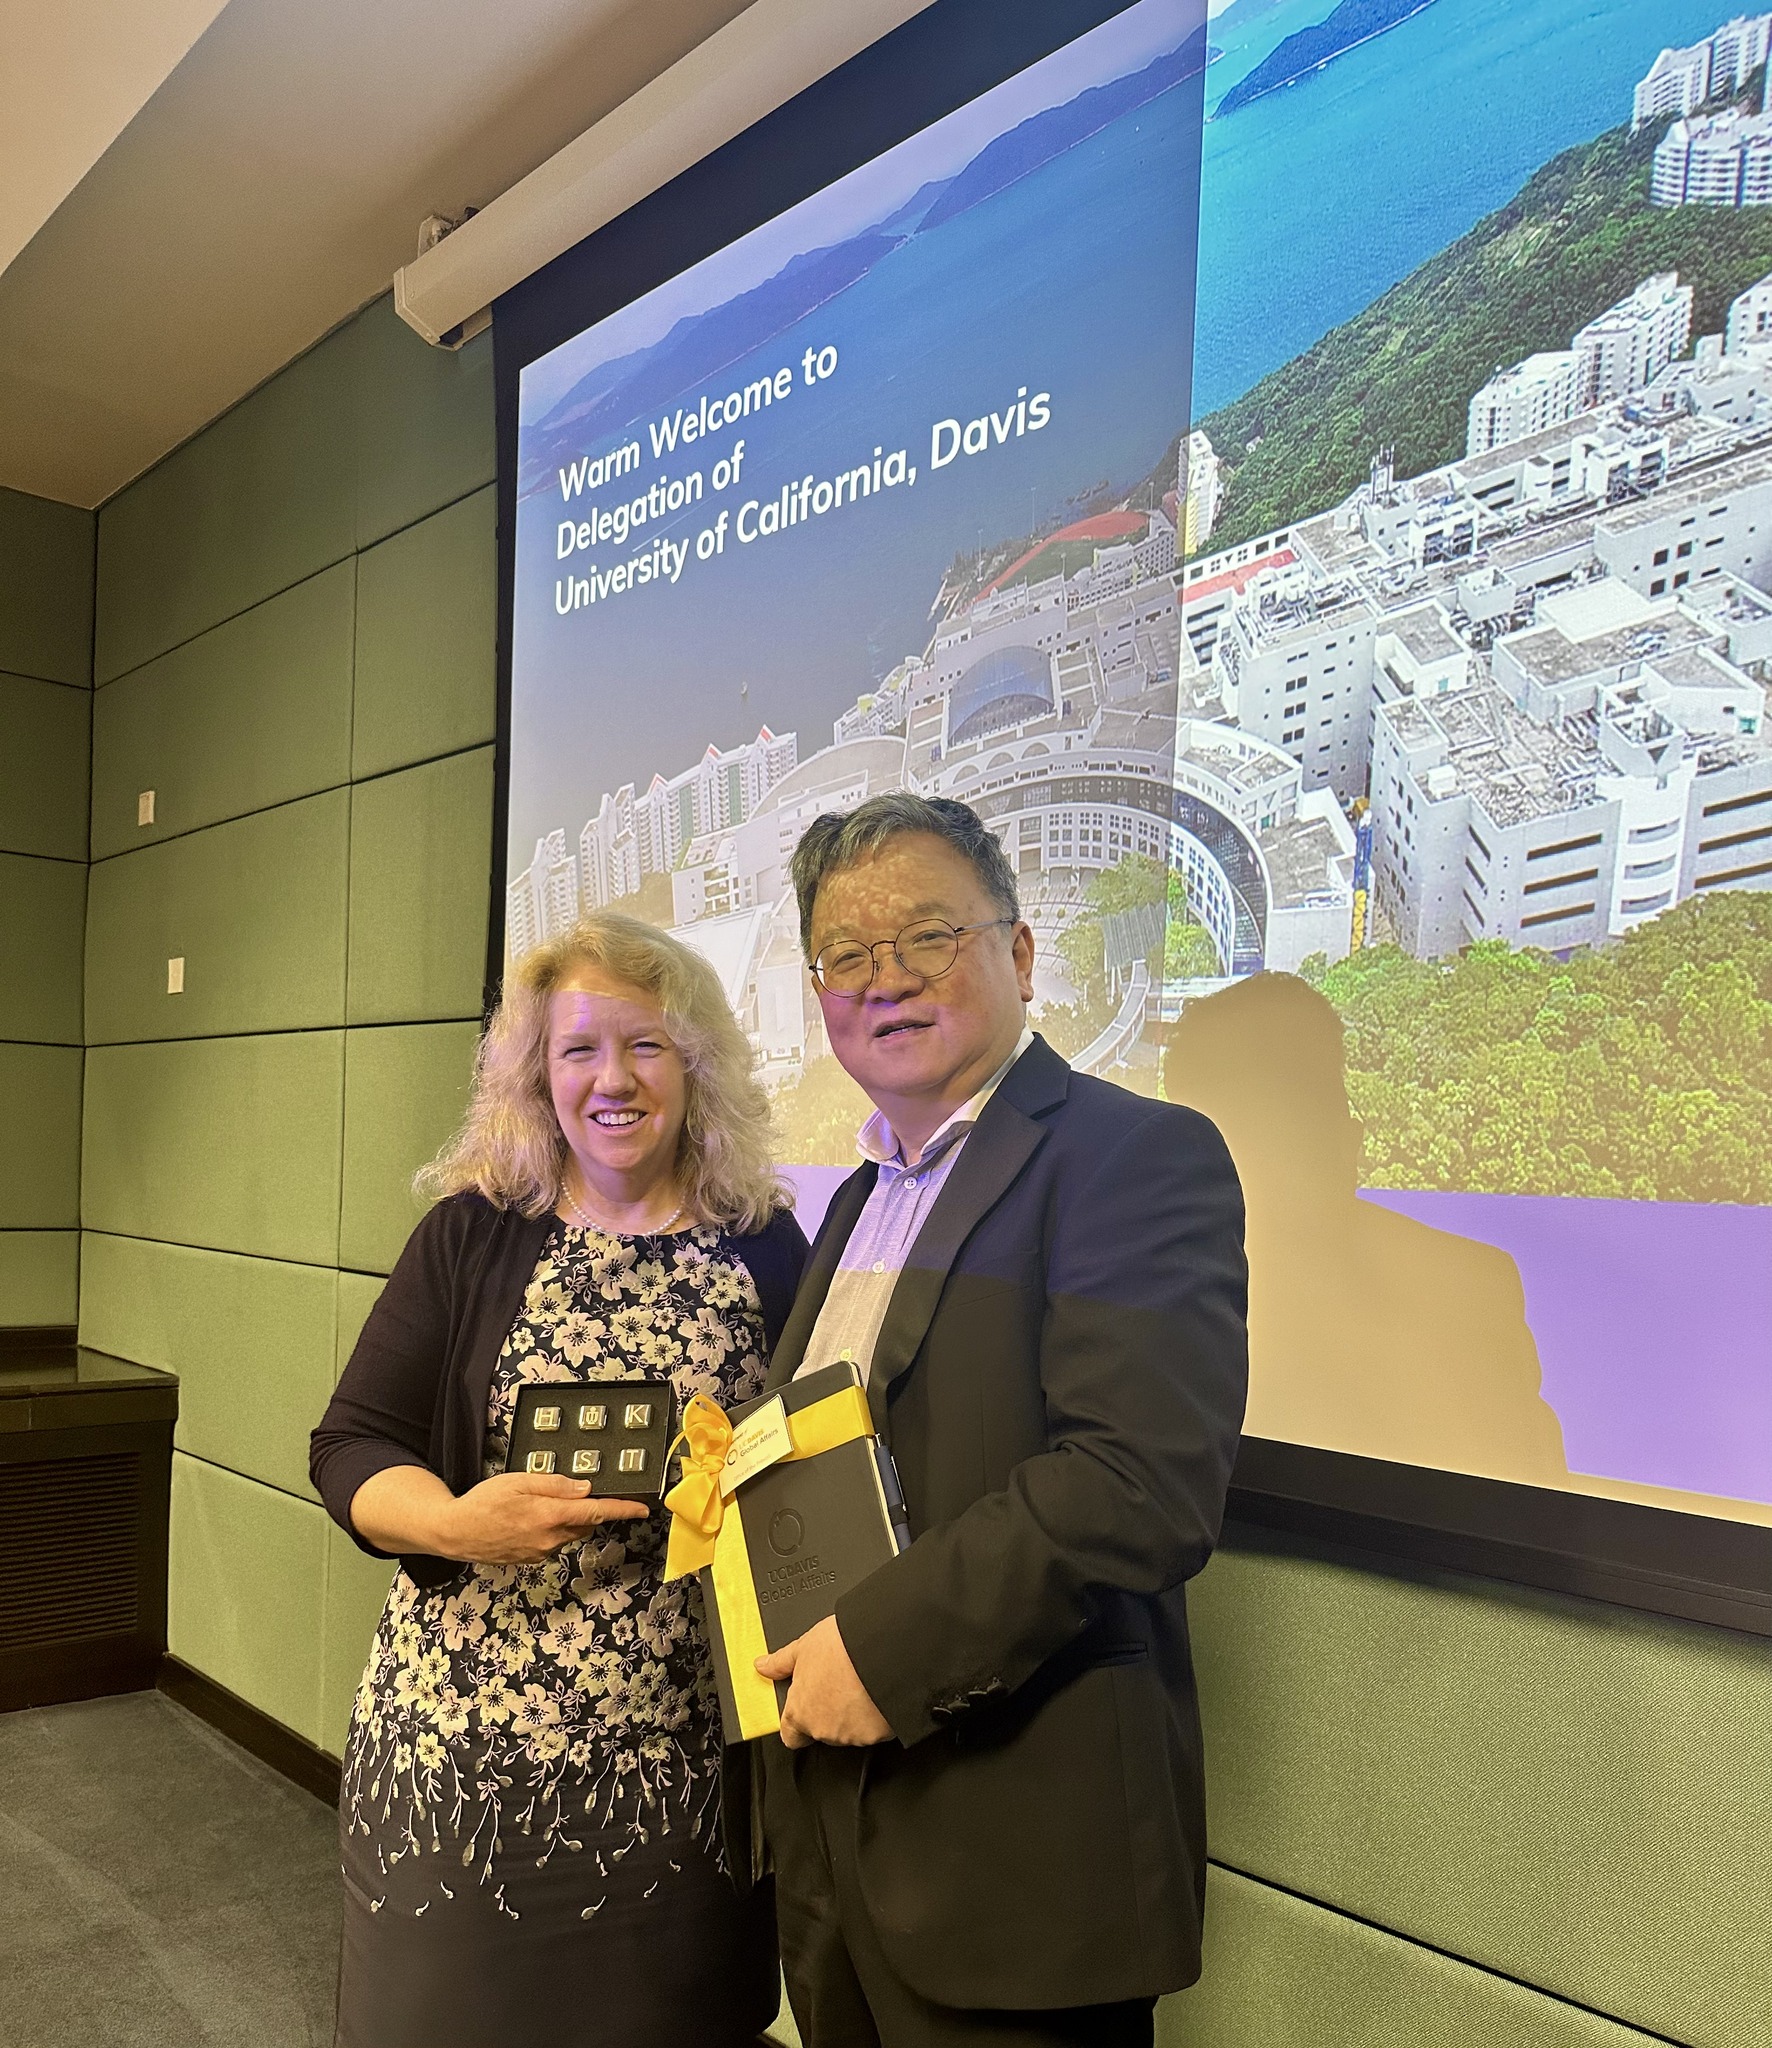 HKUST Provost Prof. GUO Yike (right) exchanges souvenirs with Dr. Mary CROUGHAN (left), Provost and Executive Vice Chancellor of the University of California, Davis.